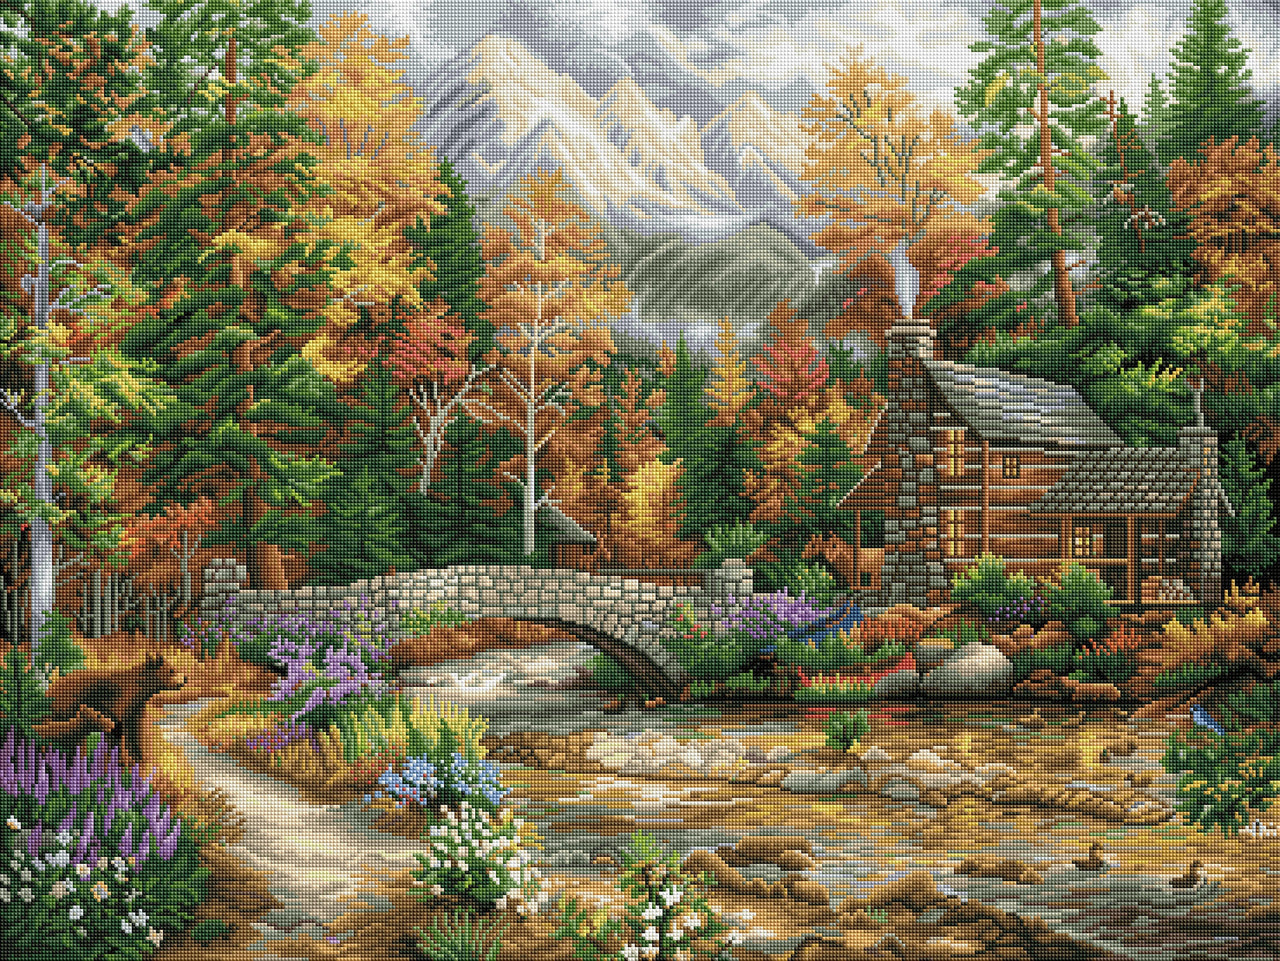 Diamond Painting Call of the Wild 36.6" x 27.6″ (93cm x 70cm) / Square with 55 Colors including 2 ABs / 102,206